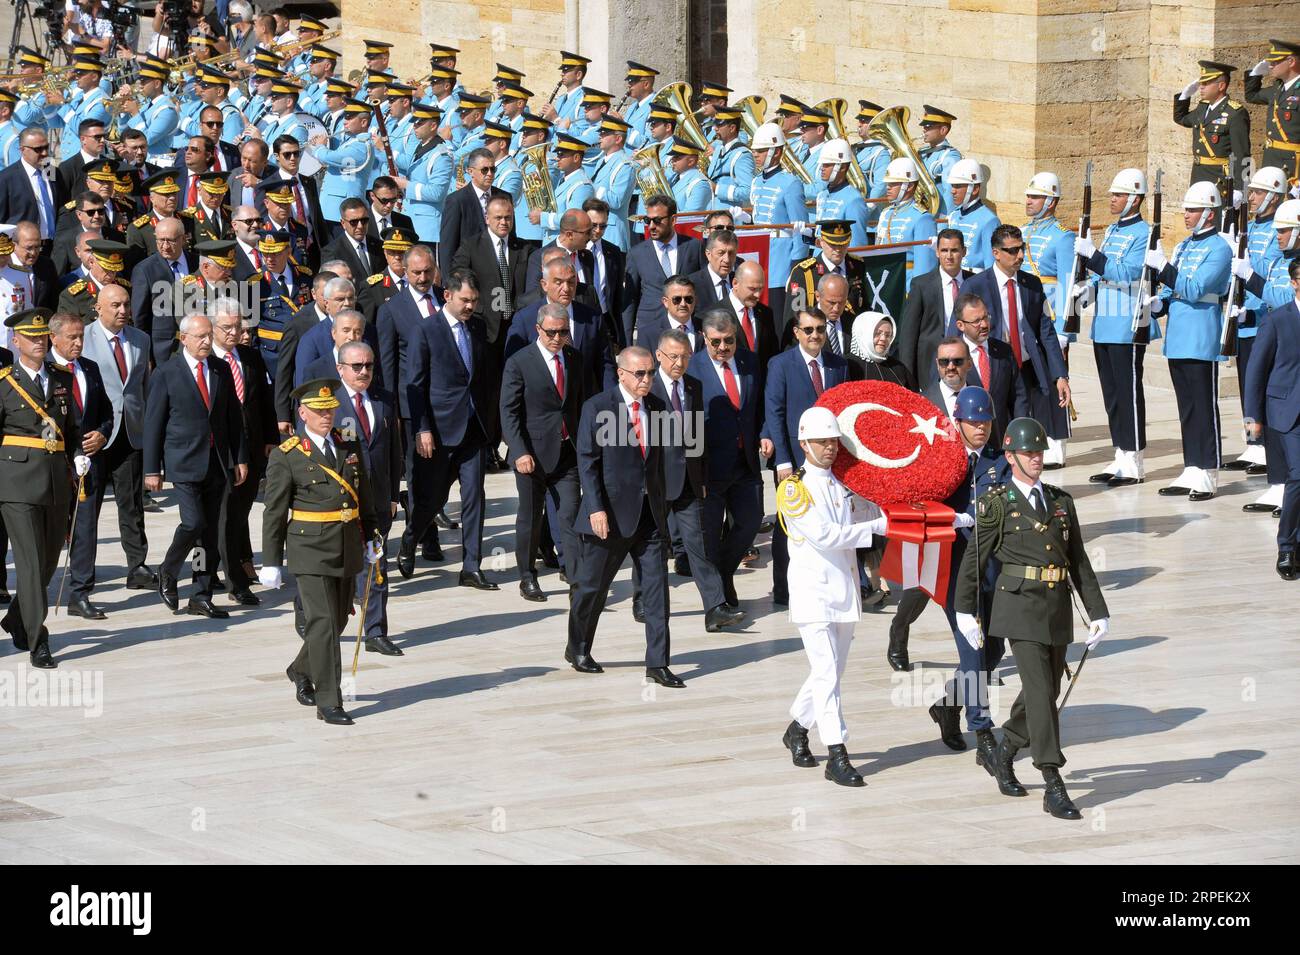 (190830) -- ANKARA, Aug. 30, 2019 -- Turkish President Recep Tayyip Erdogan attends a ceremony held in the Ataturk Mausoleum in Ankara, Turkey, Aug. 30, 2019. The Turkish leader paid tribute to Mustafa Kemal Ataturk, founder of the Republic of Turkey, at the ceremony. Turkey marked on Friday the 97th anniversary of Victory Day, the day the Turks defeated the Greek forces at the Battle of Dumlupinar, the final battle of the Turkish War of Independence in 1922. (Photo by /Xinhua) TURKEY-ANKARA-VICTORY DAY MustafaxKaya PUBLICATIONxNOTxINxCHN Stock Photo